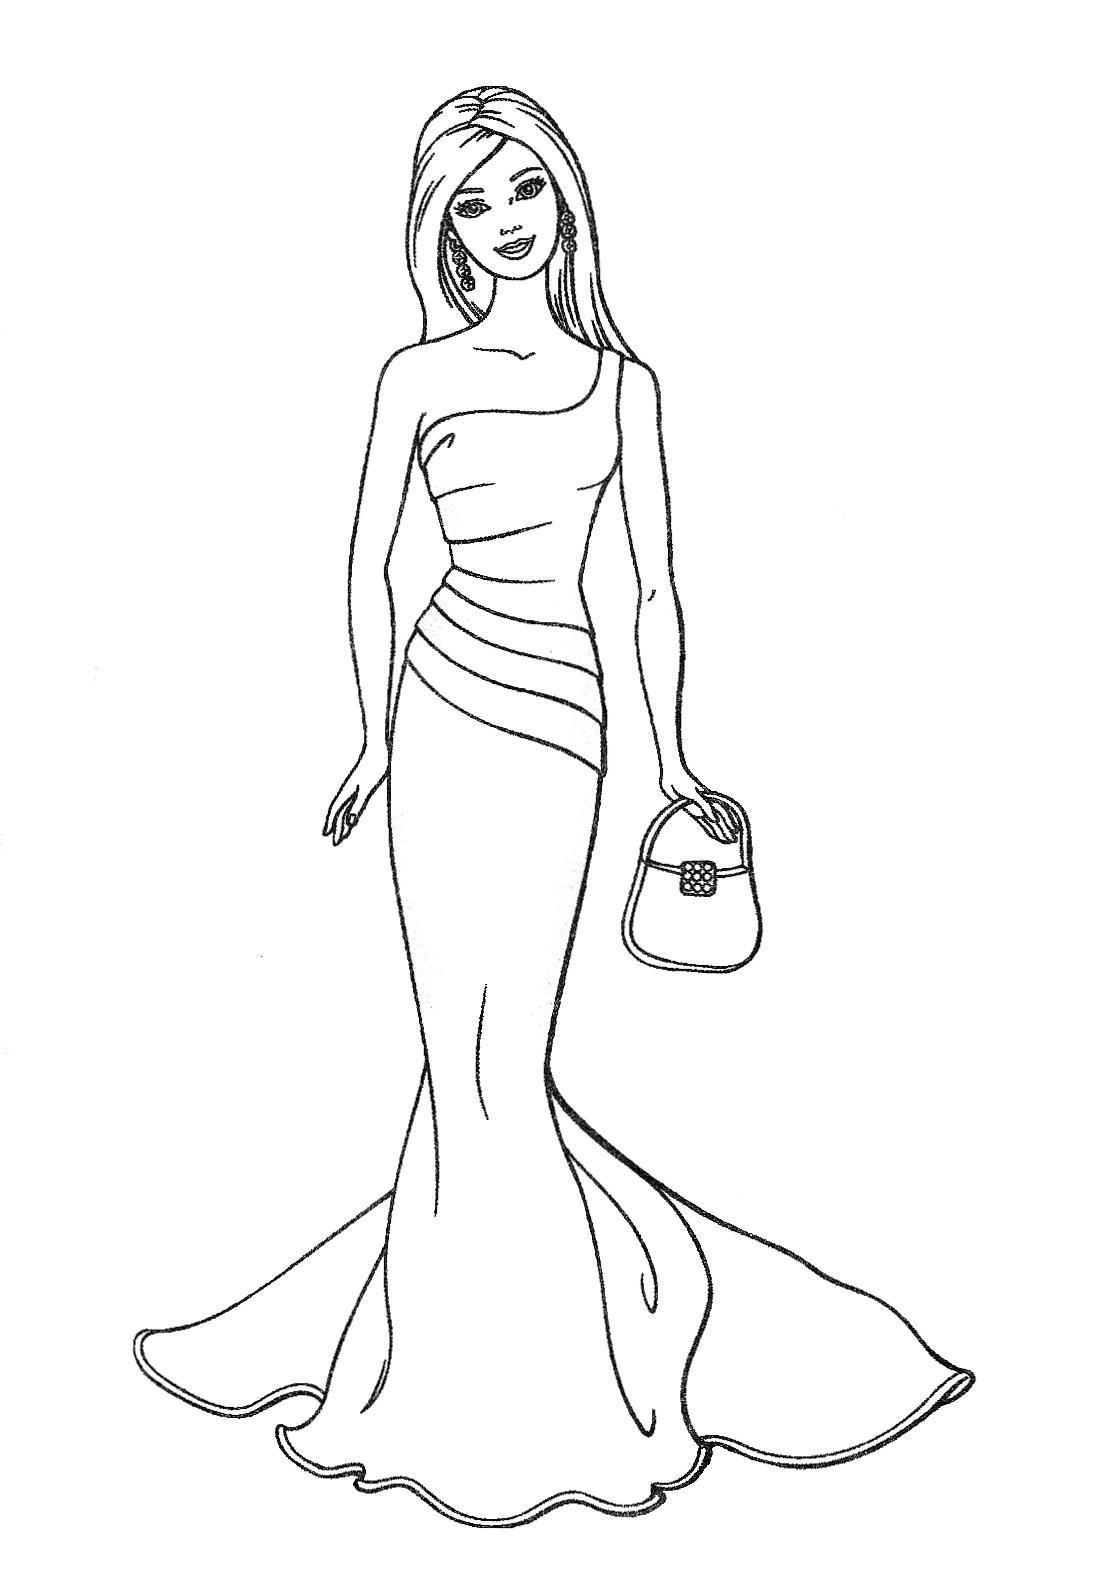 Dolls drawing at getdrawings. Barbie clipart outline